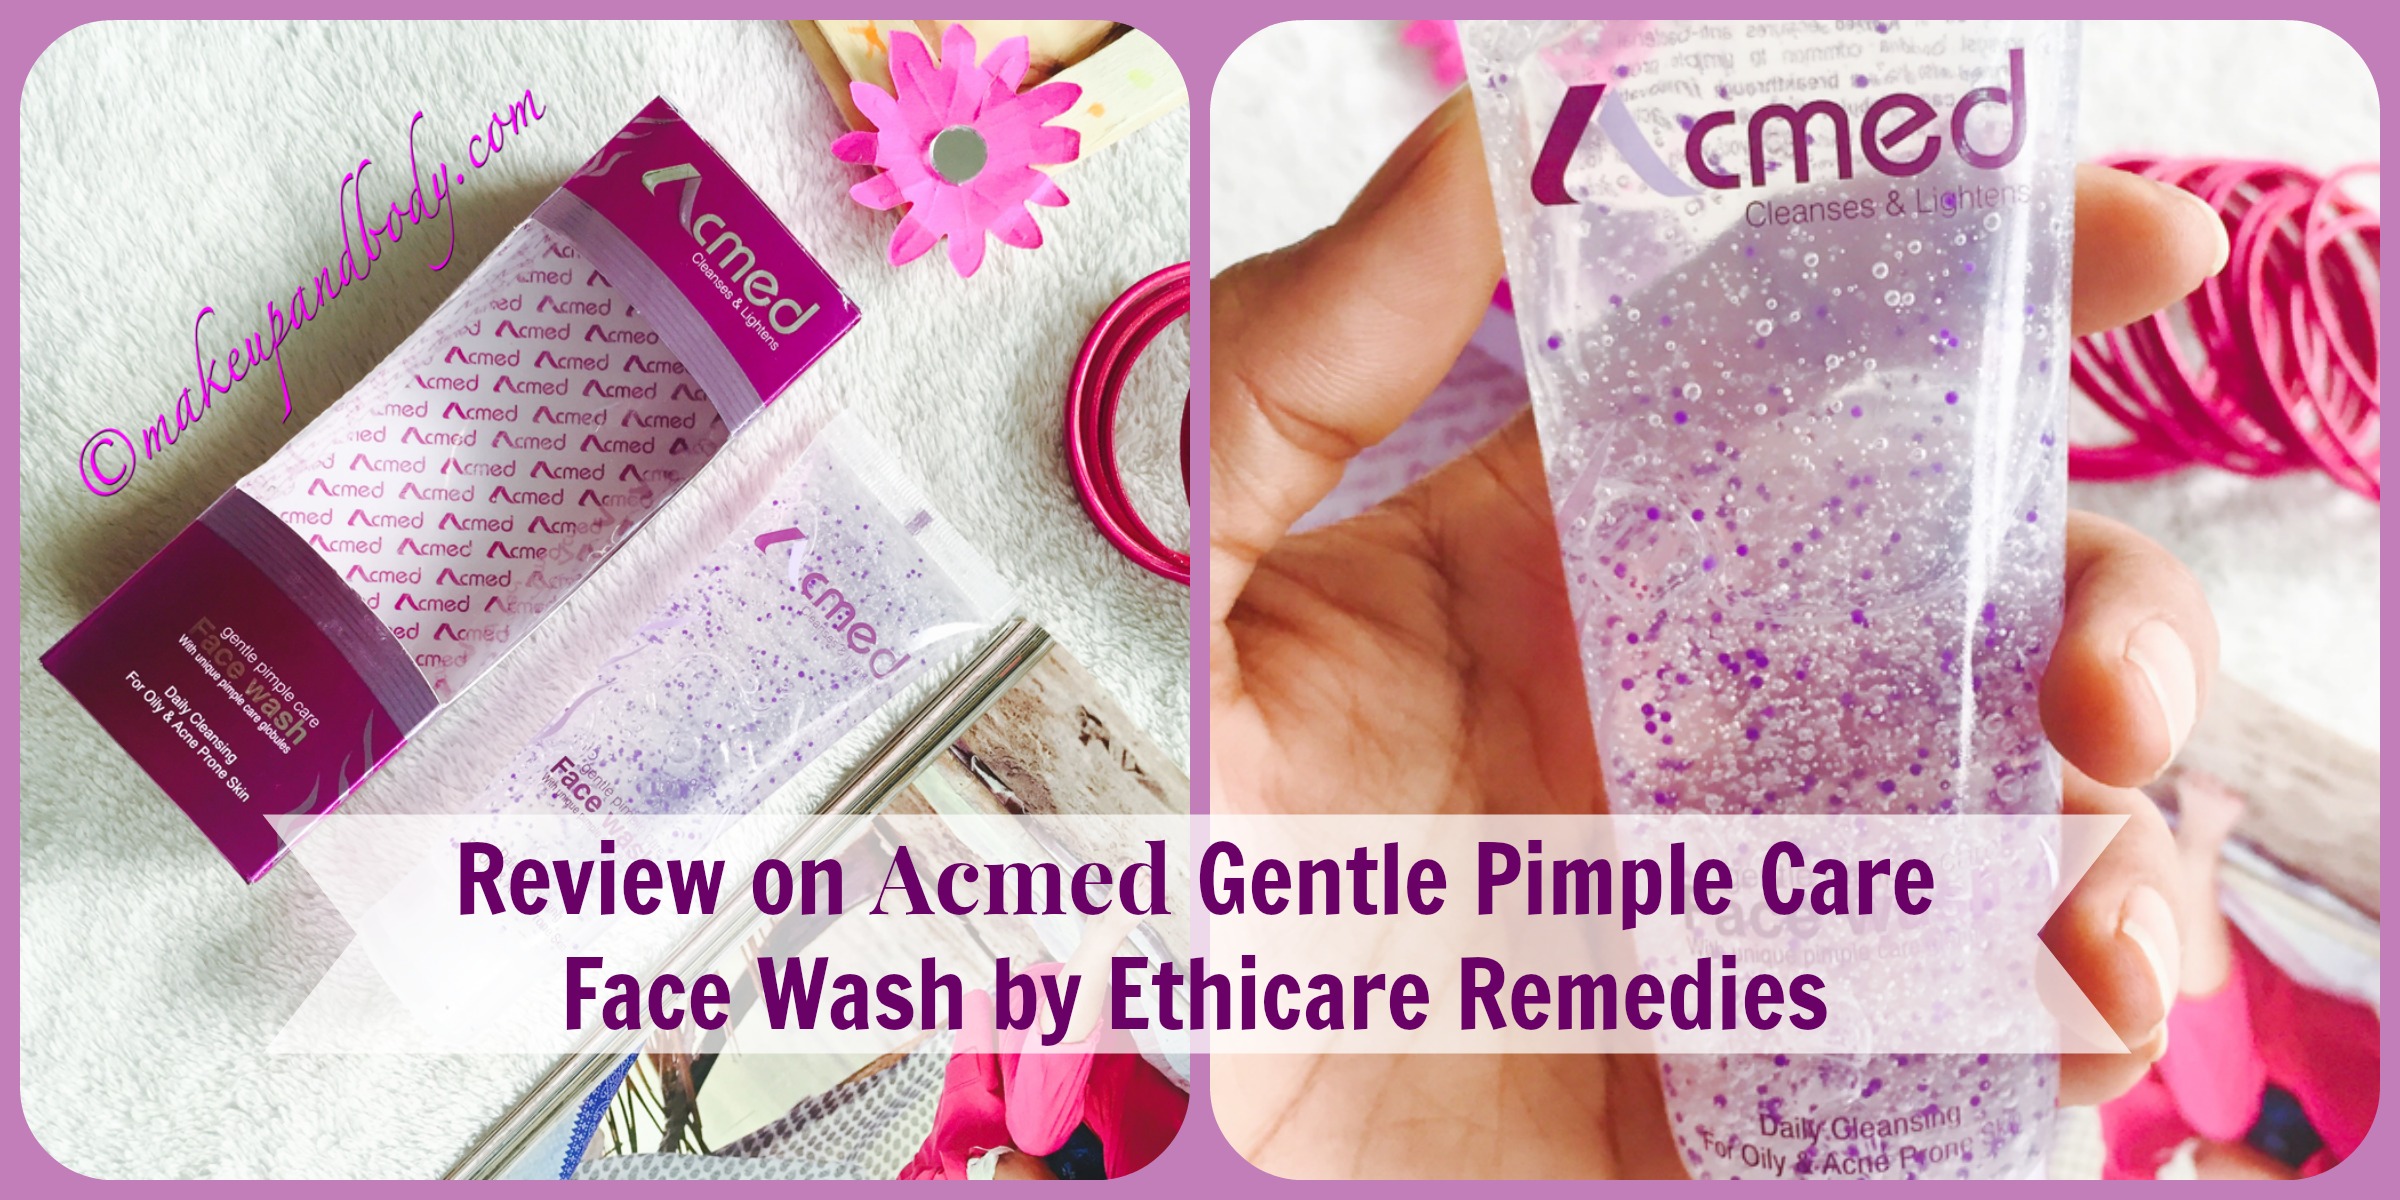 Review on Acmed Gentle pimple care Face Wash by Ethicare Remedies 